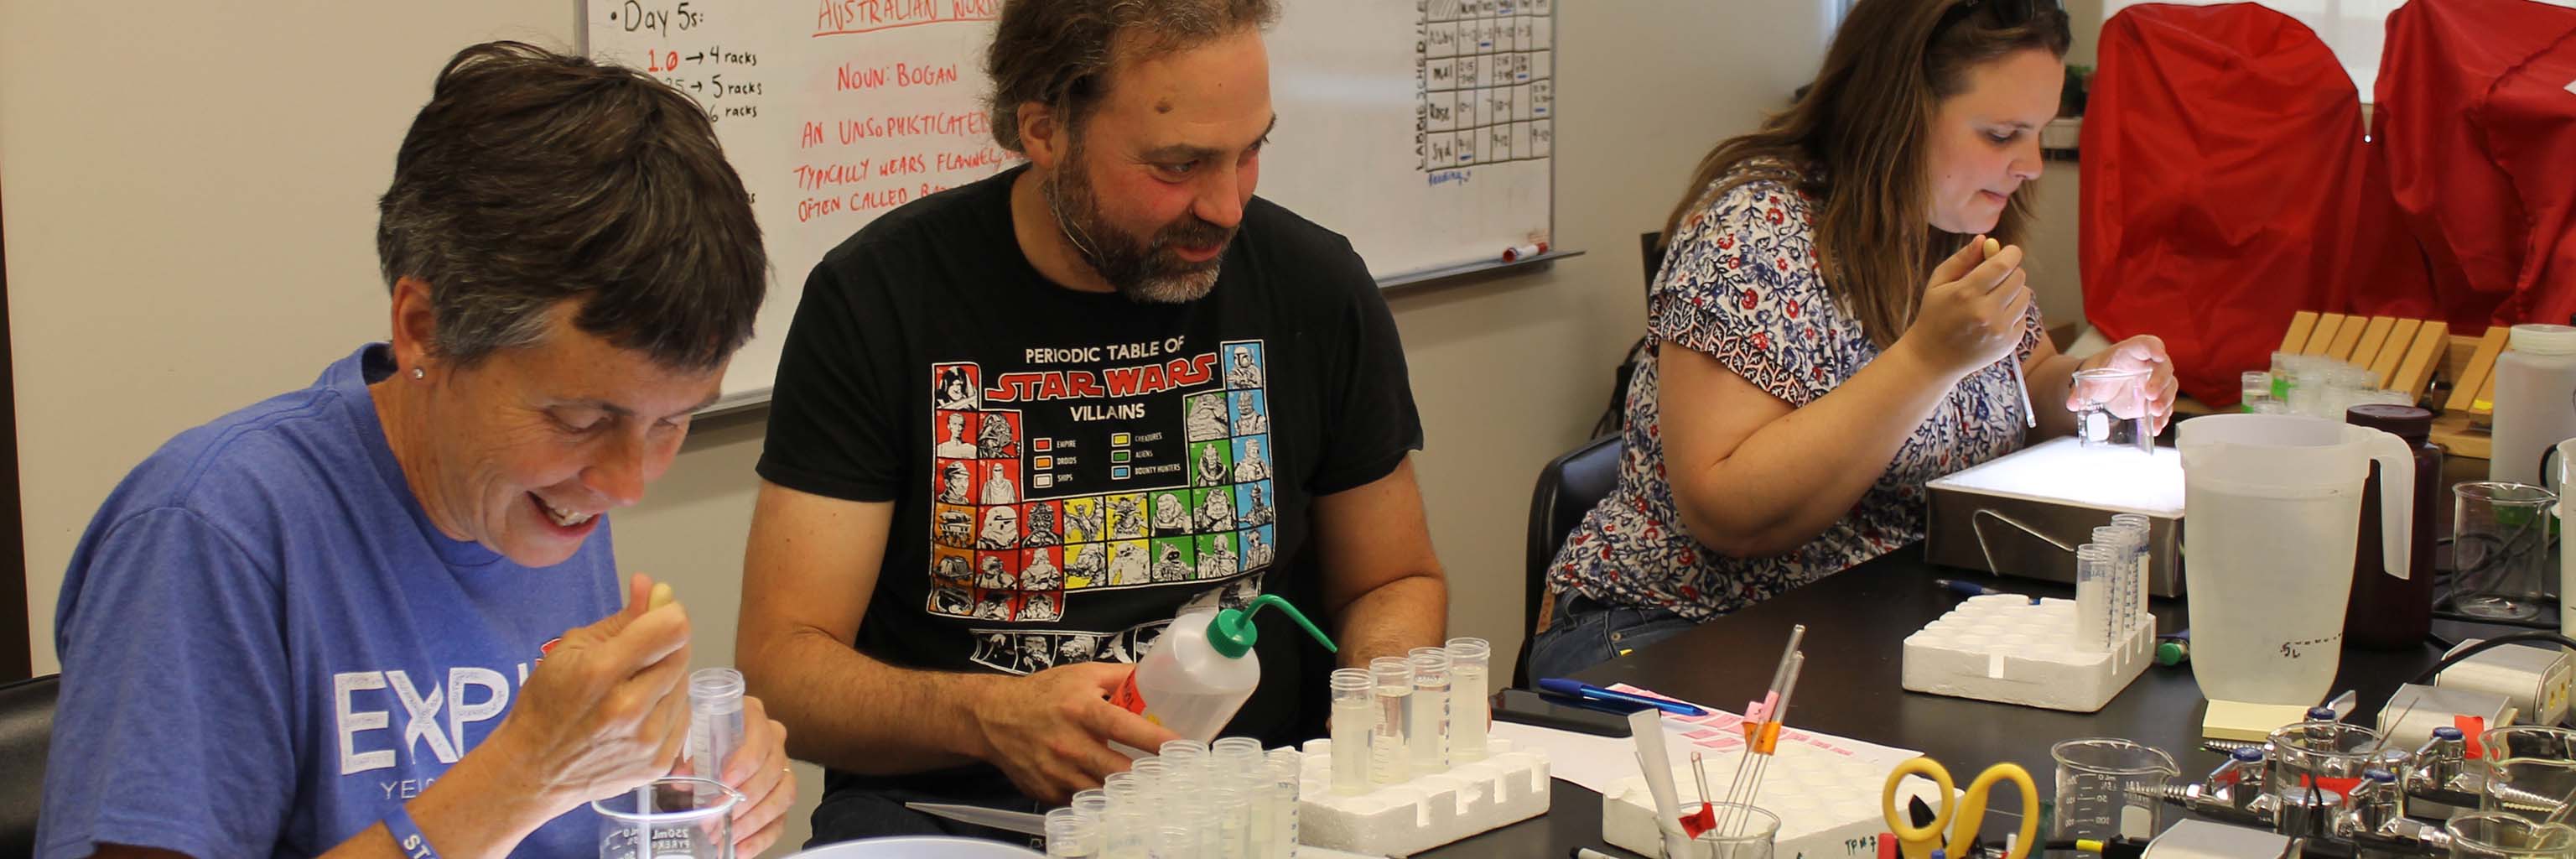 Biology Summer Institute participants pipetting Daphnia in the lab with Professor Spencer Hall (center) at the Indiana University Department of Biology.
